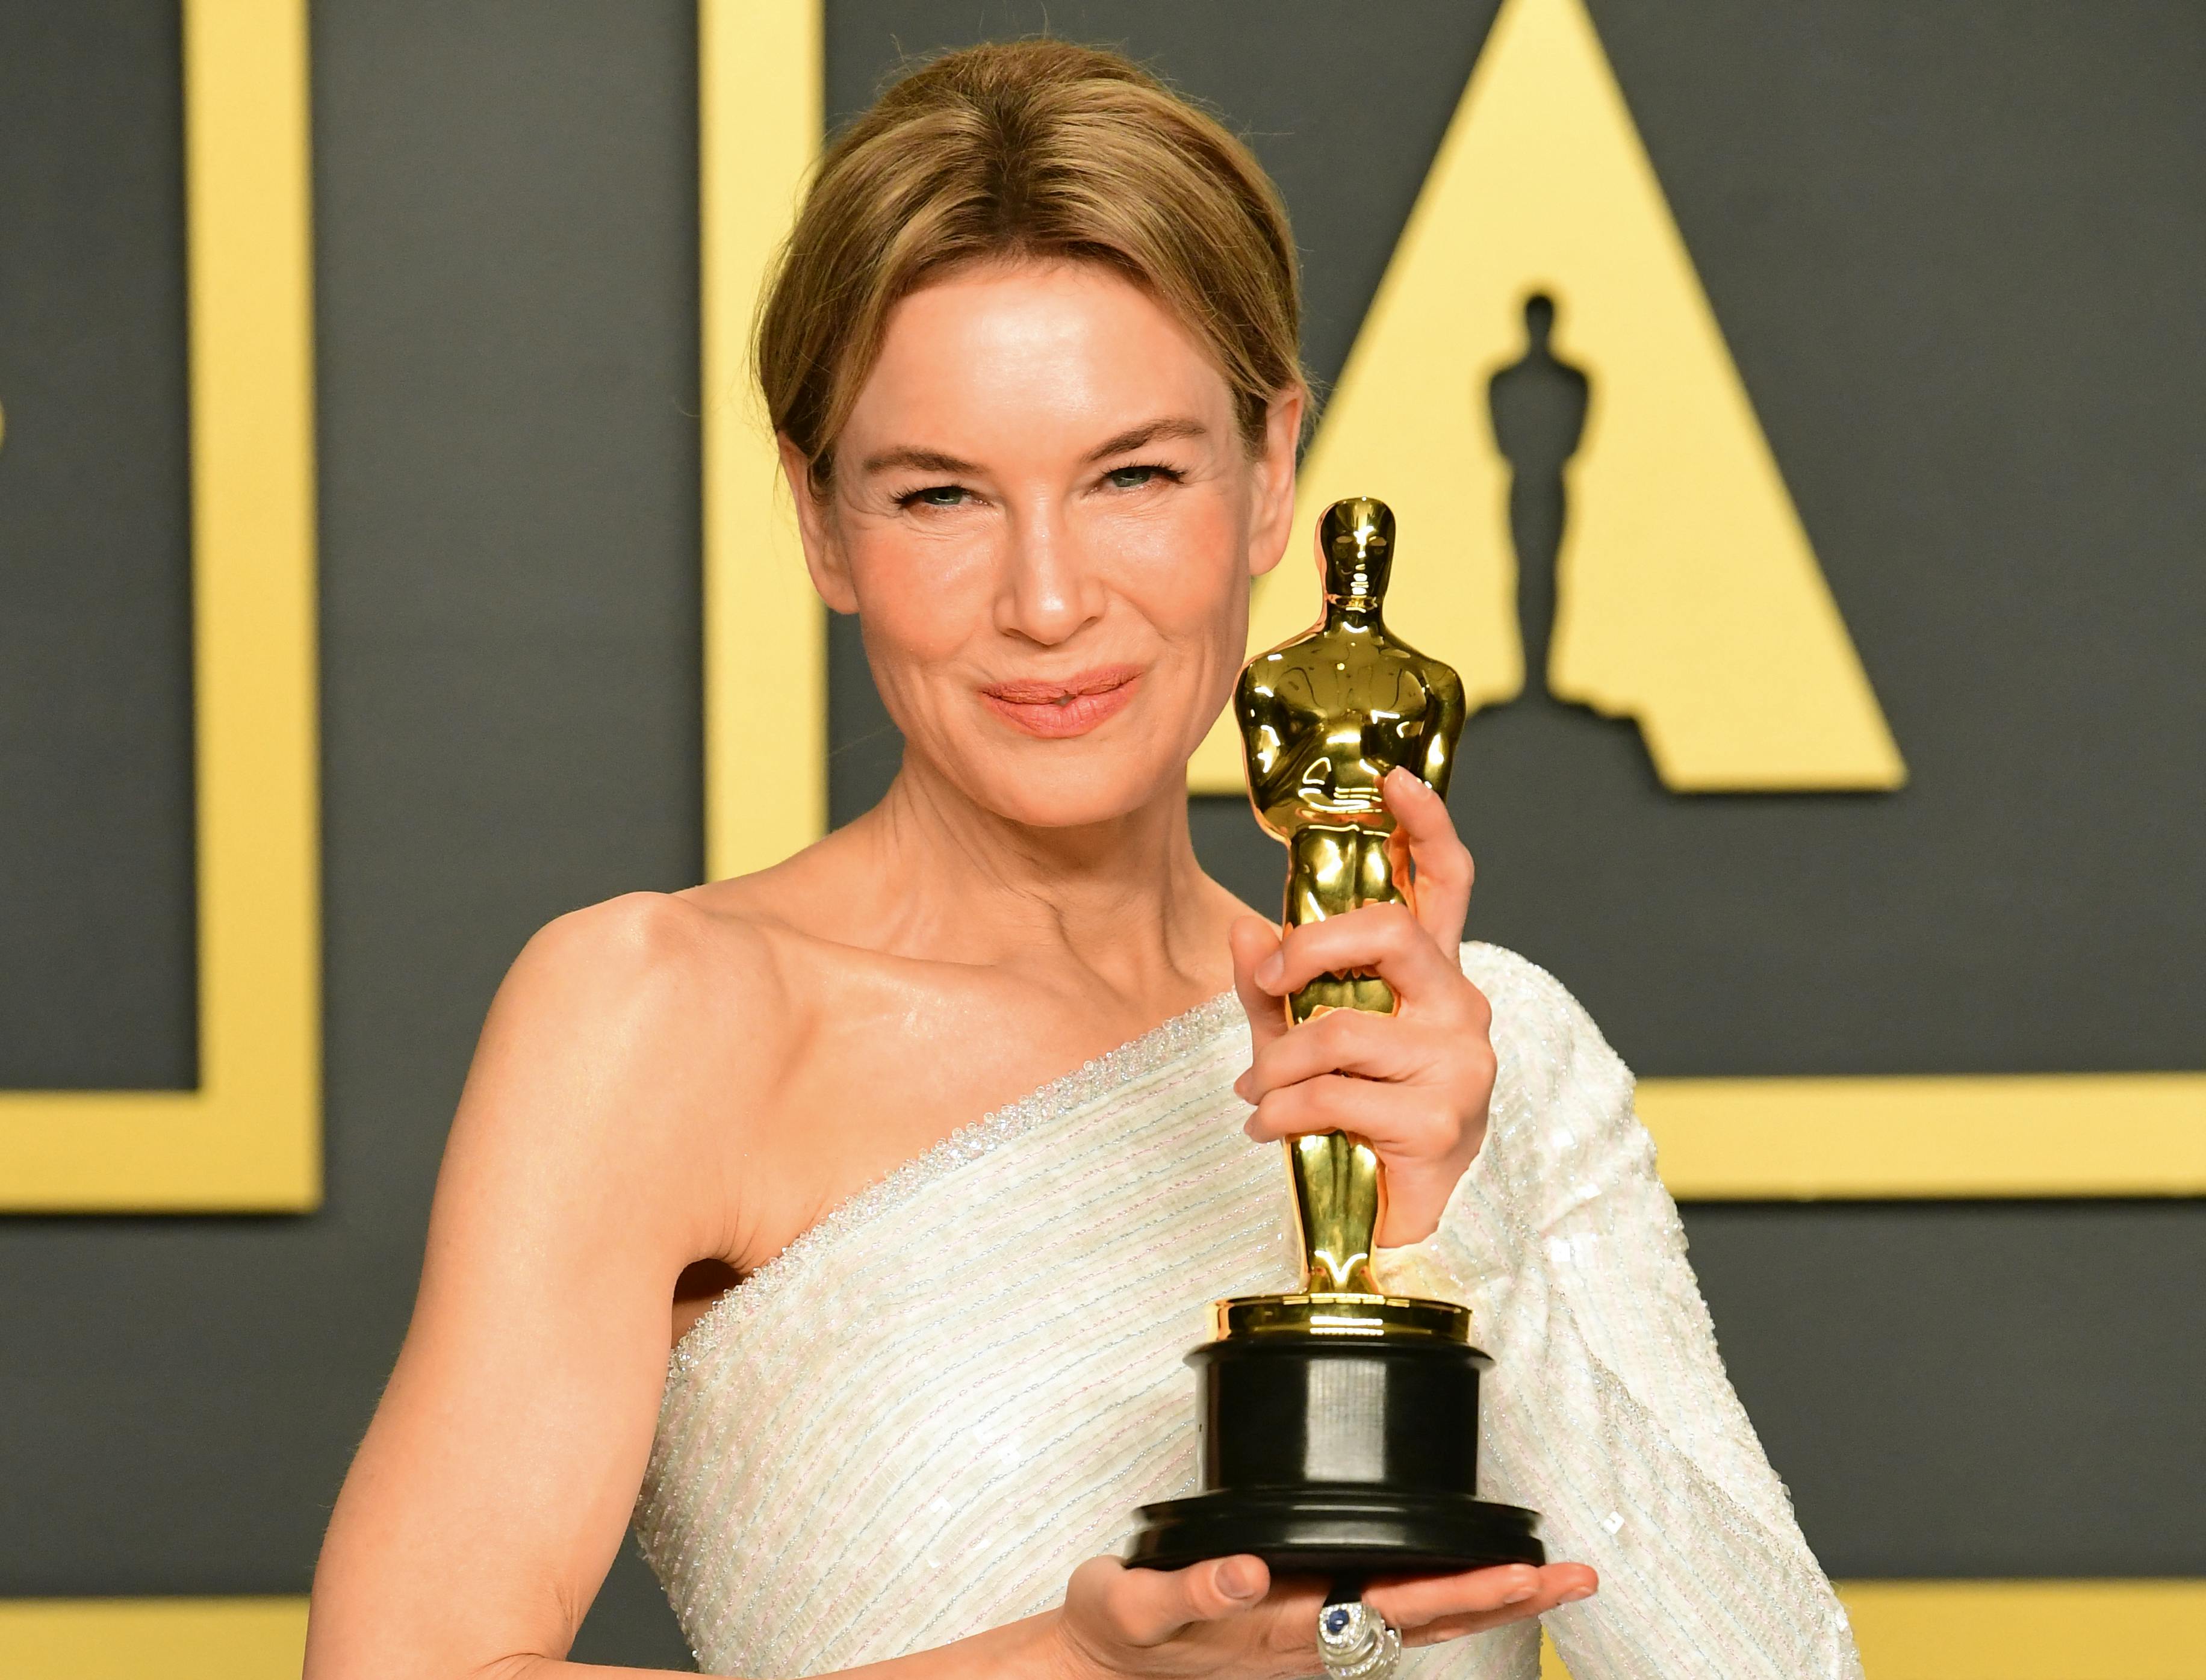 US actress Renee Zellweger poses in the press room with the Oscar for for Best Actress for "Judy" during the 92nd Oscars at the Dolby Theater in Hollywood, California on February 9, 2020.  FREDERIC J. BROWN / AFP